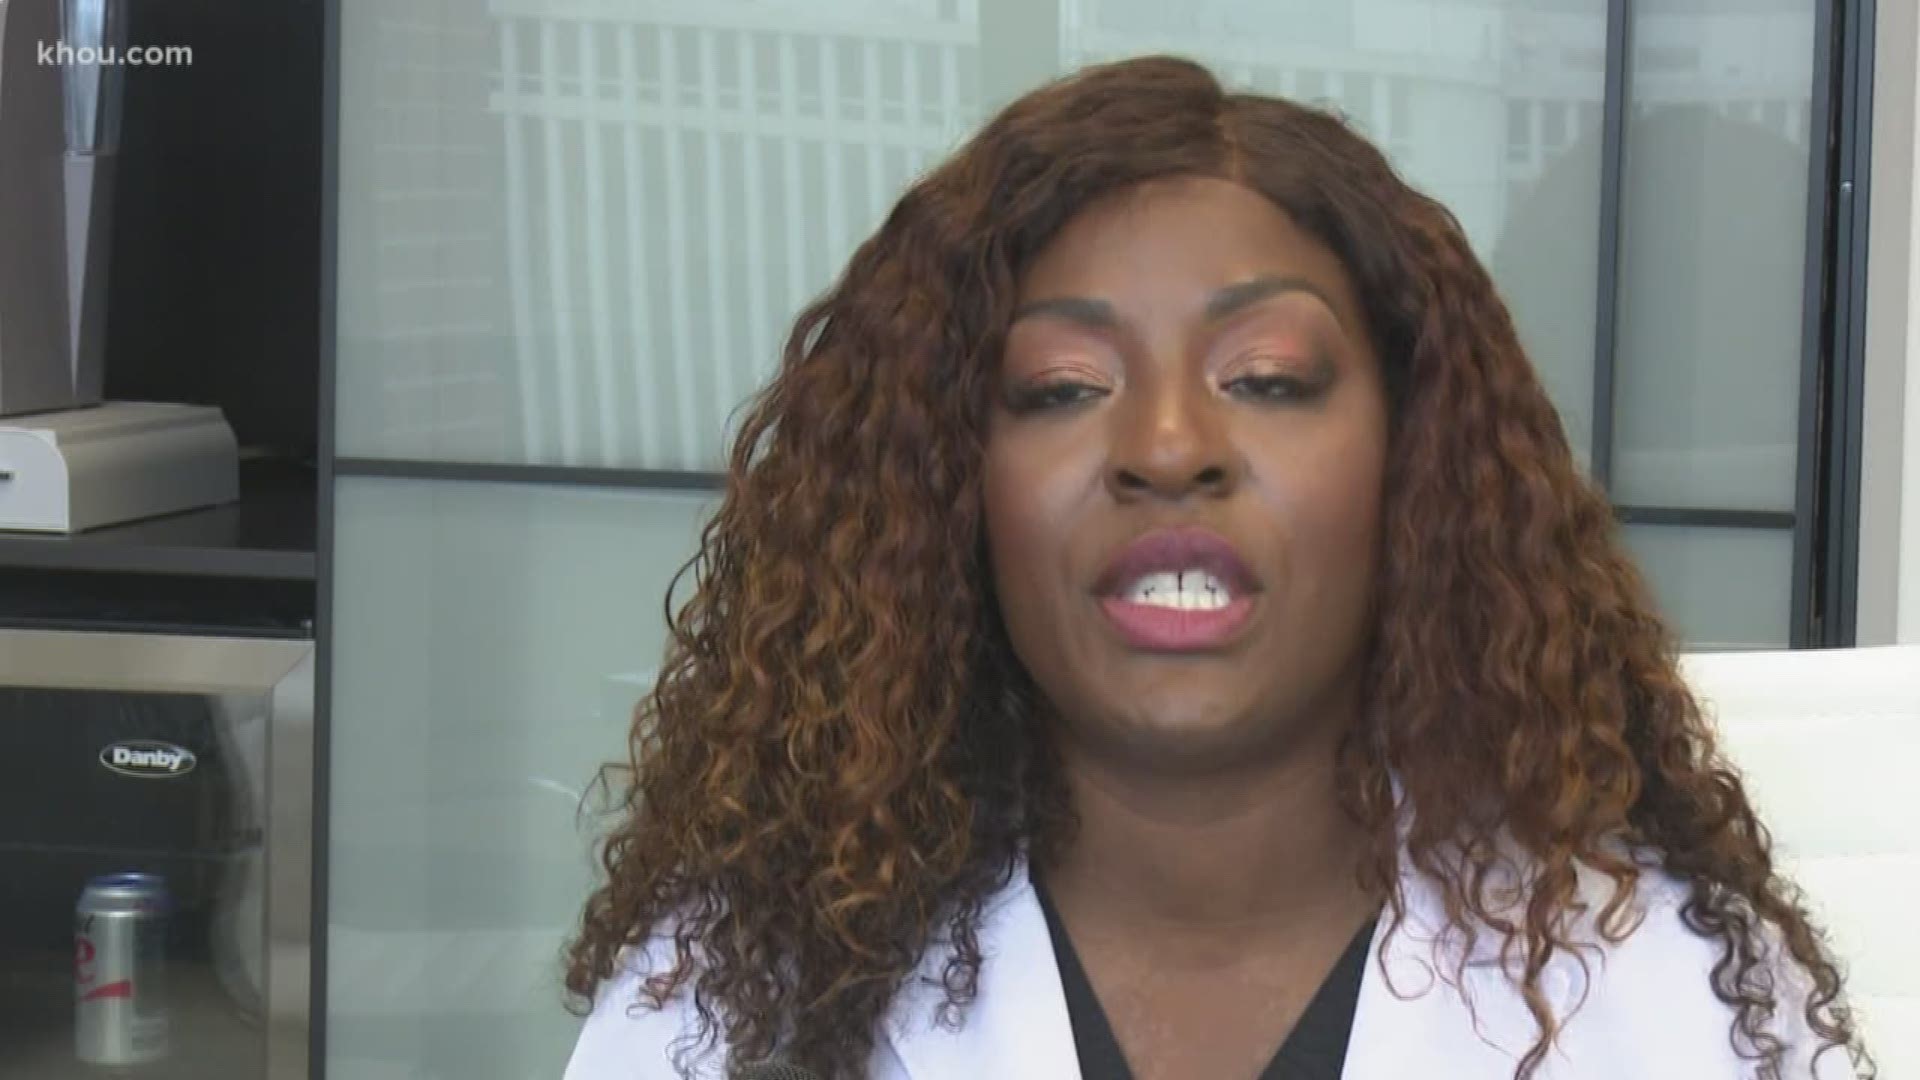 A Houston doctor who was forced to cover up on an American Airlines flight wants to make sure no one else has the same experience.